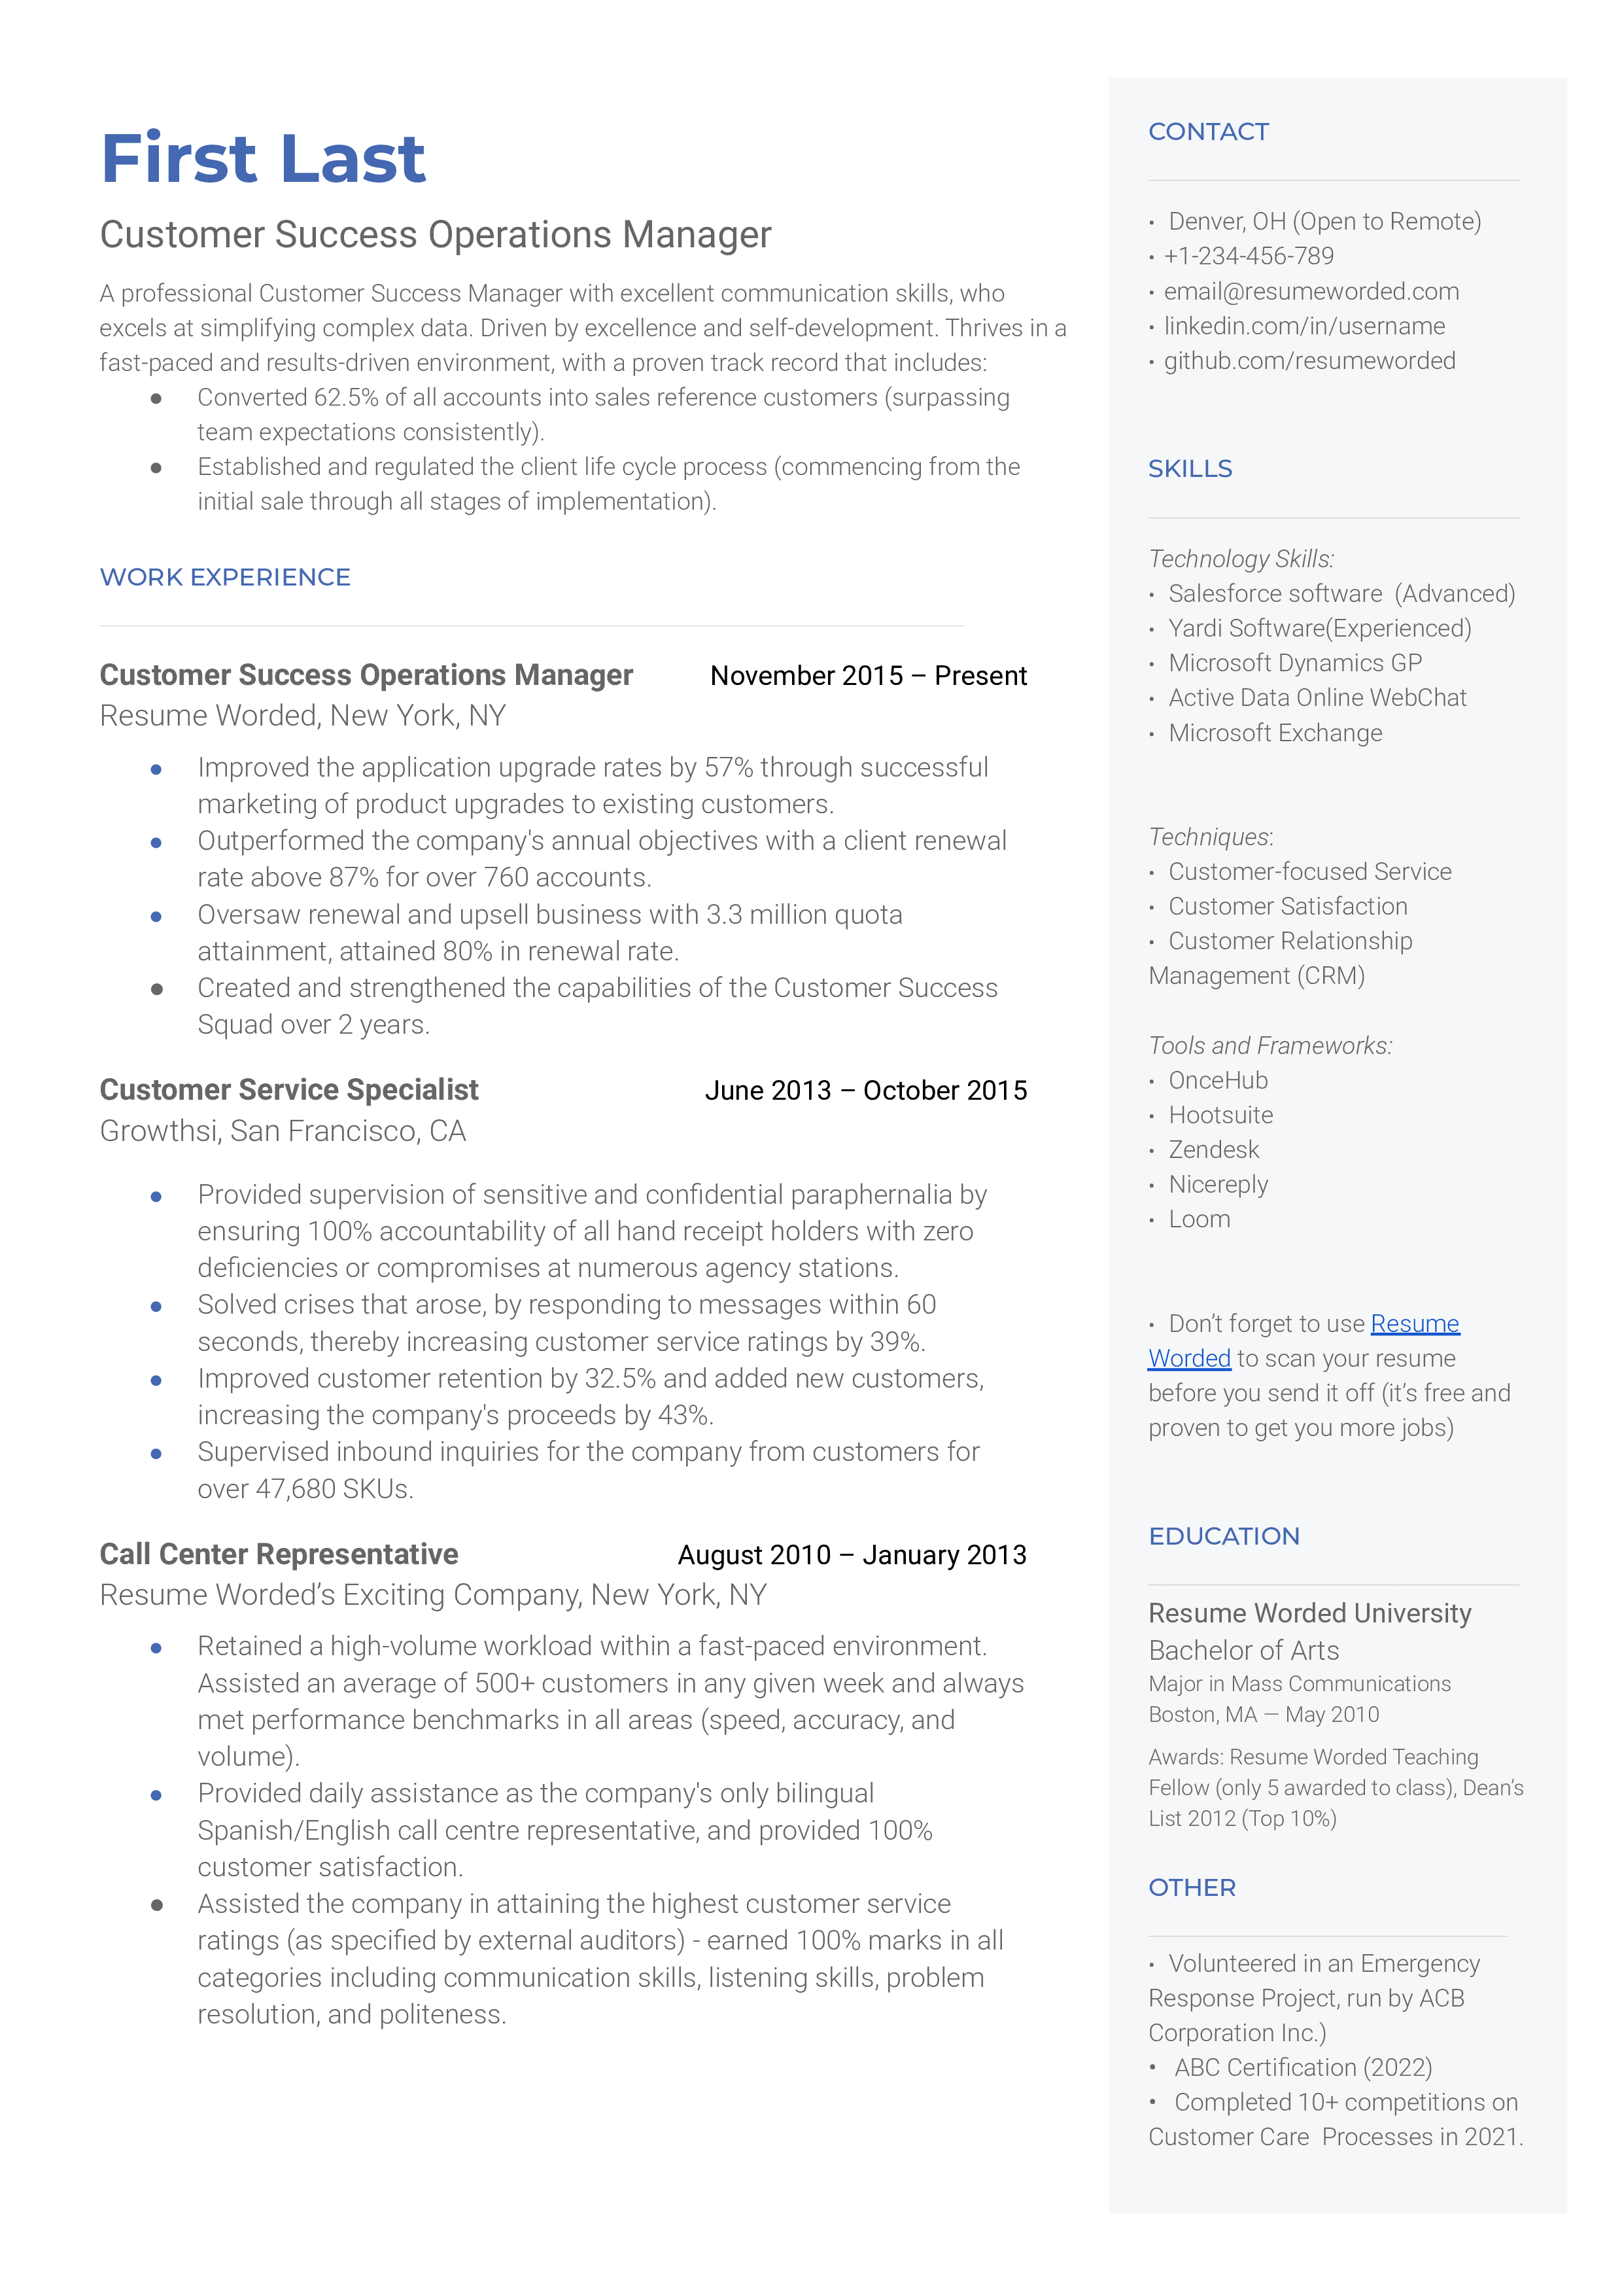 Customer Success Operations Manager Resume Sample